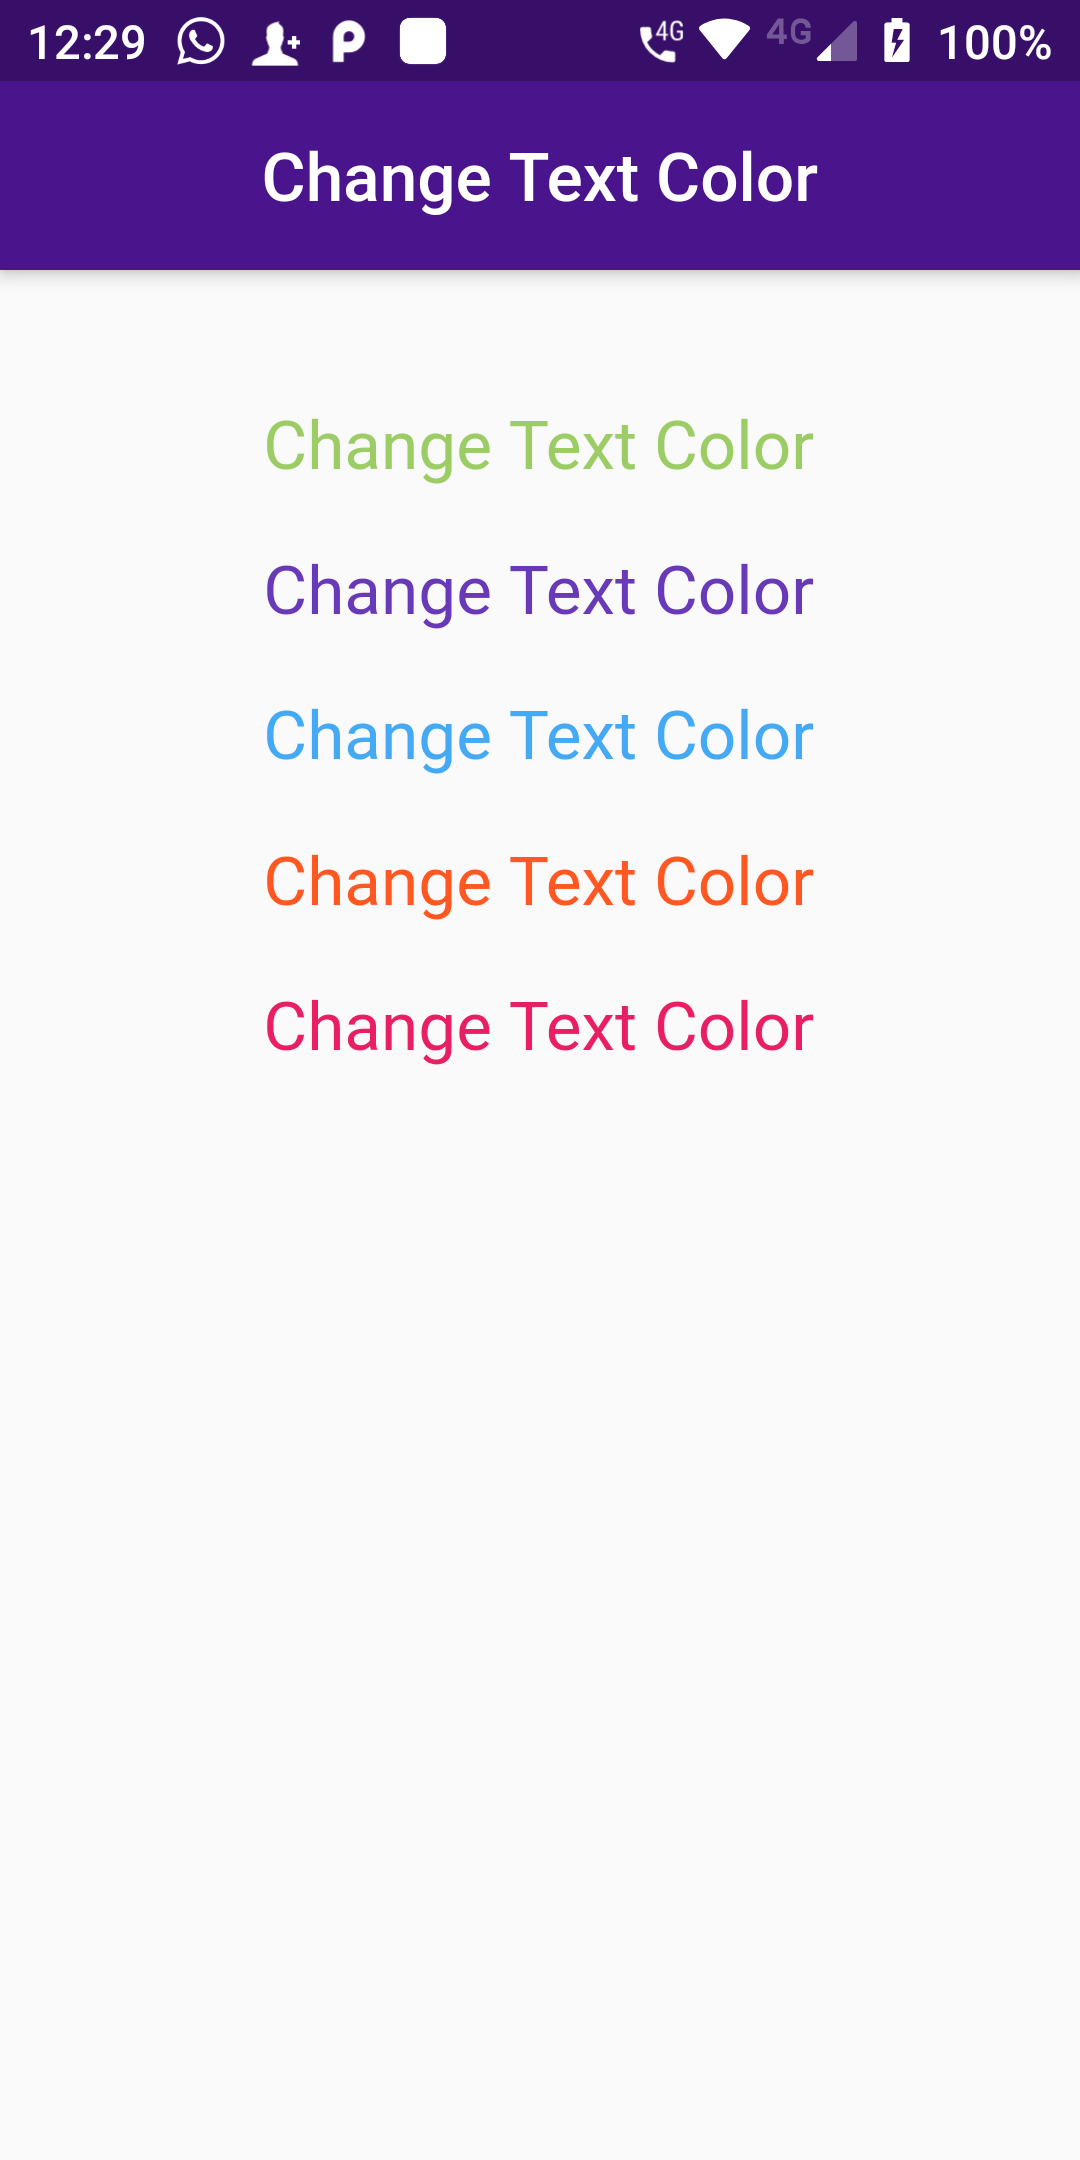 How To Set Up Text Color Using Flutter Android App